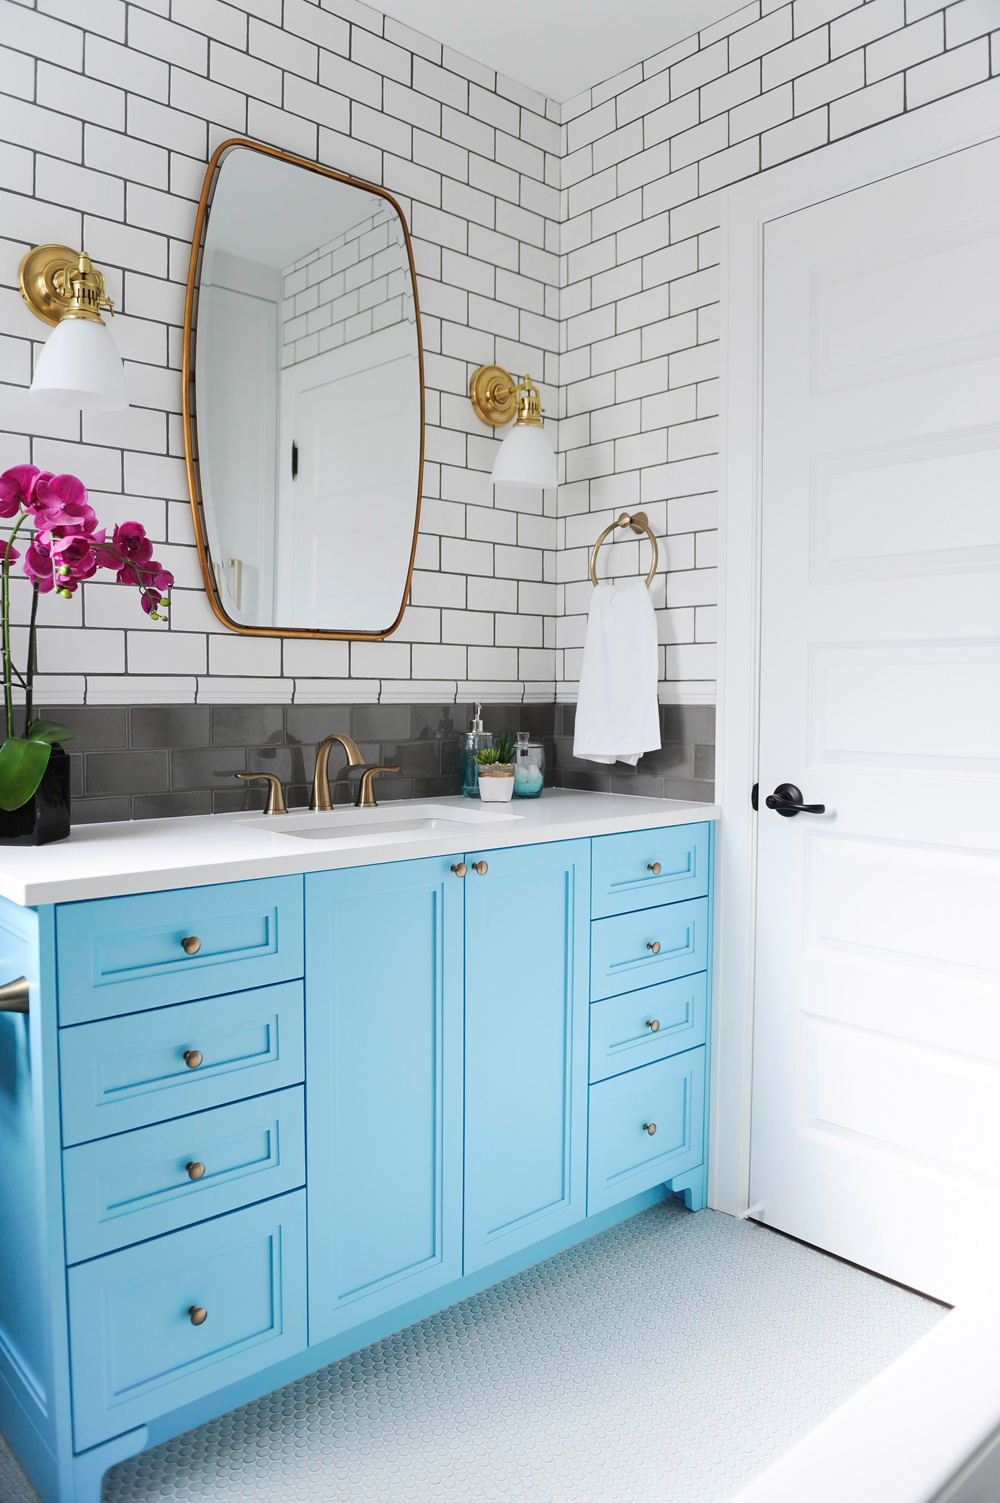 bathroom with blue vanity, grey then white subway wall tiles, brass mirror and sconces